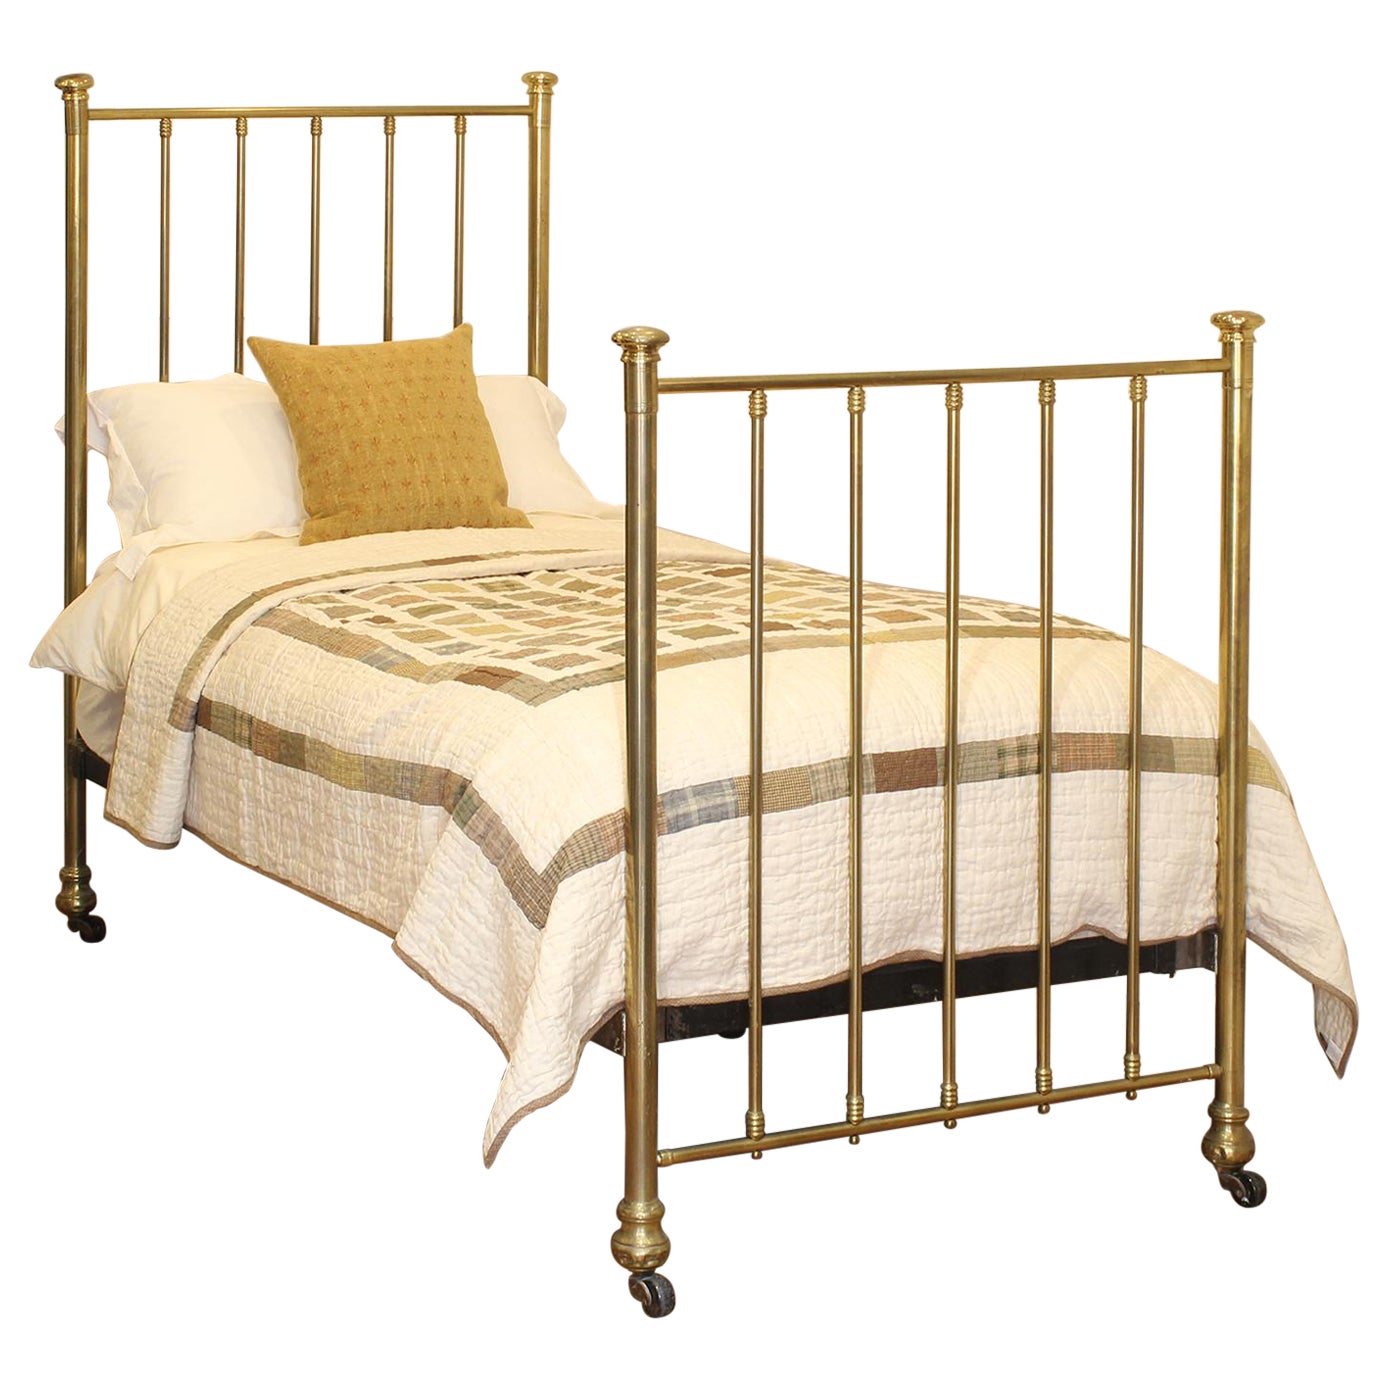 What are the parts of a brass bed called?